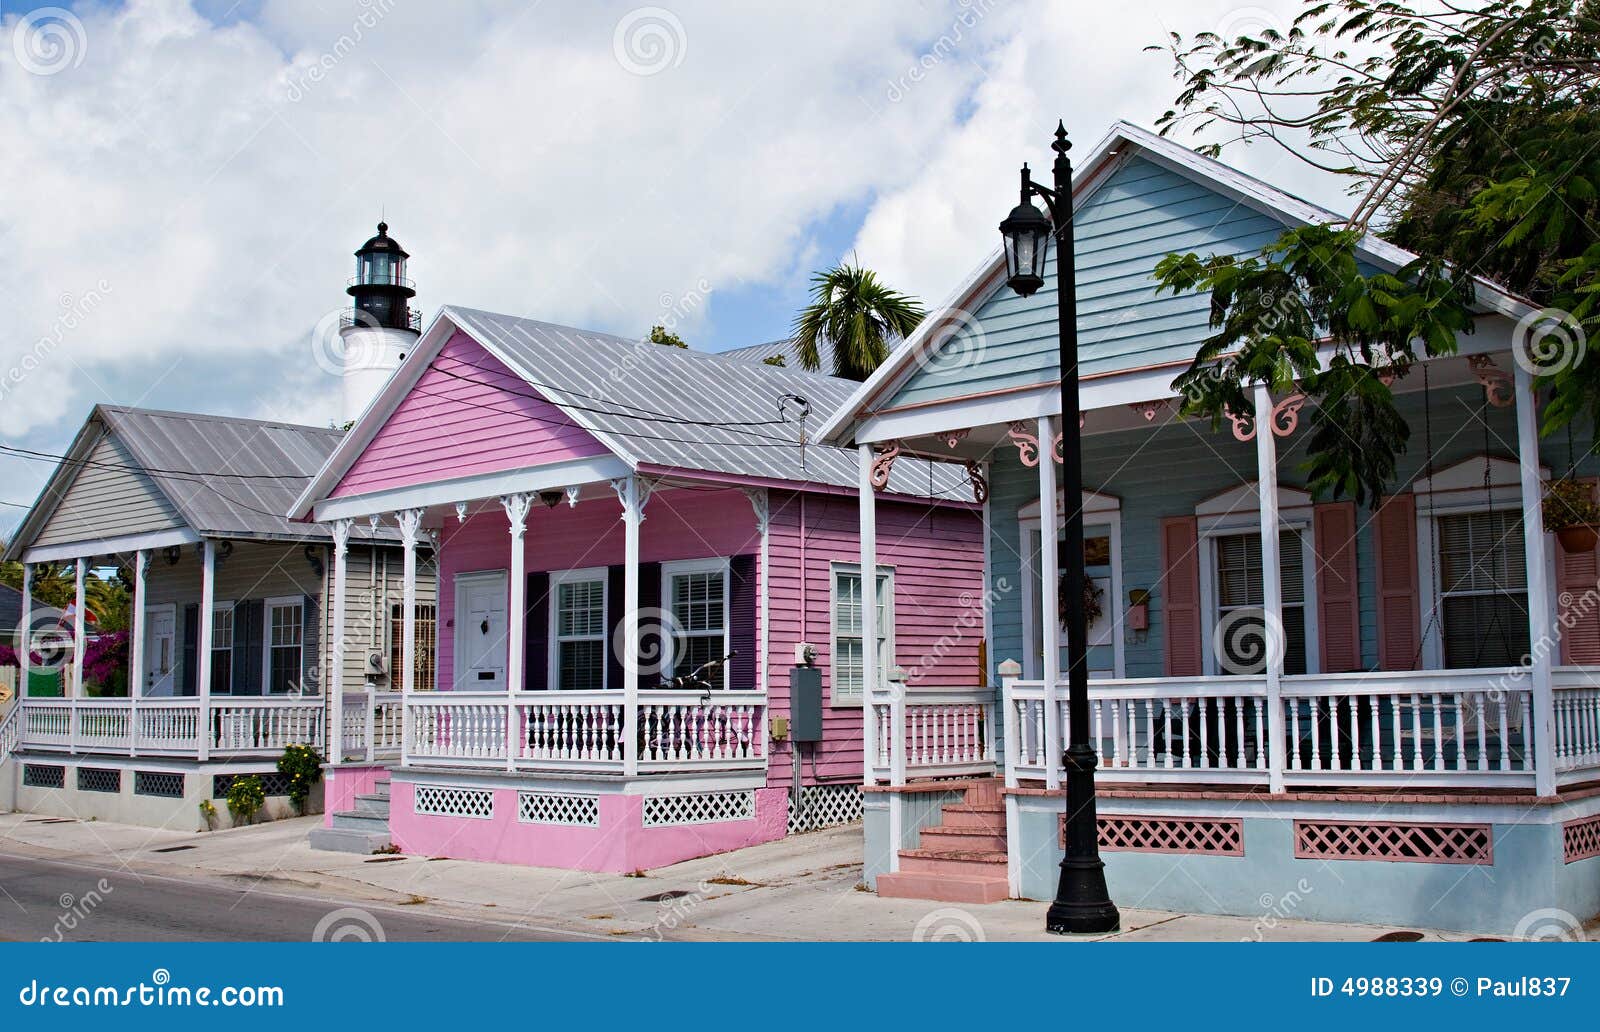 Key West Cottages Stock Image Image Of Caribbean Tropical 4988339